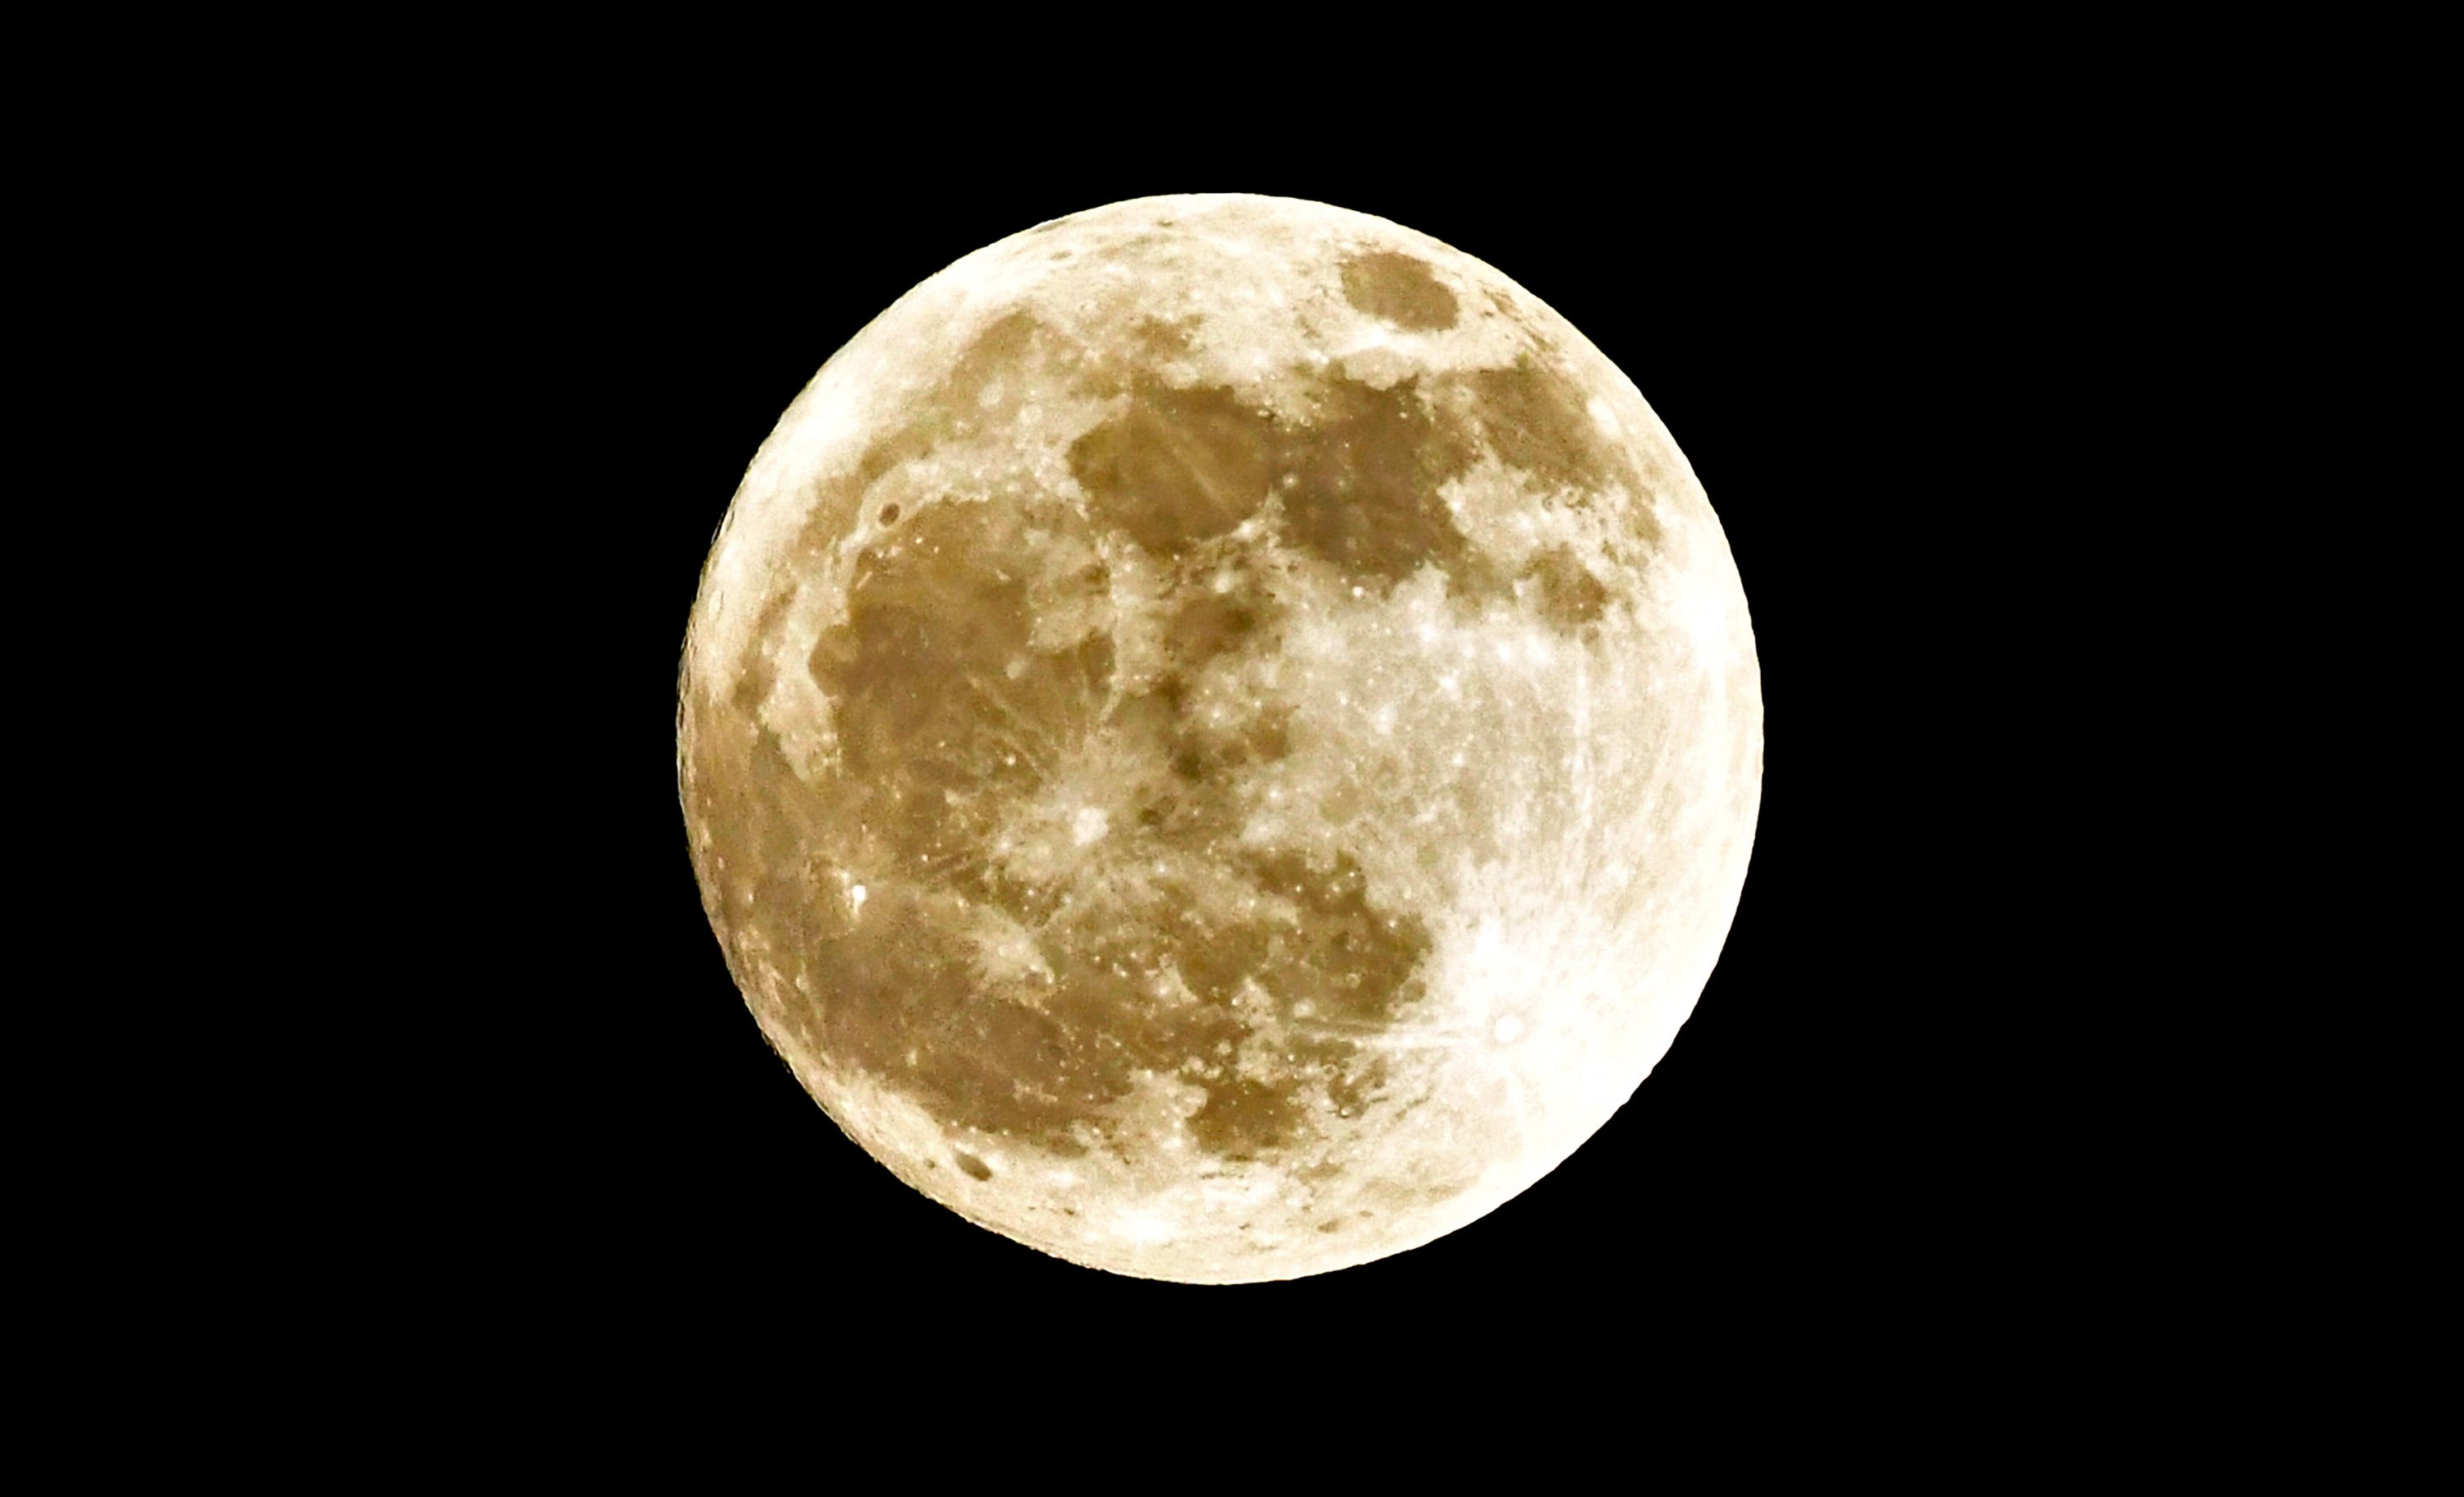 When is the June full moon? You don't want to miss this once every 18 years Strawberry Moon